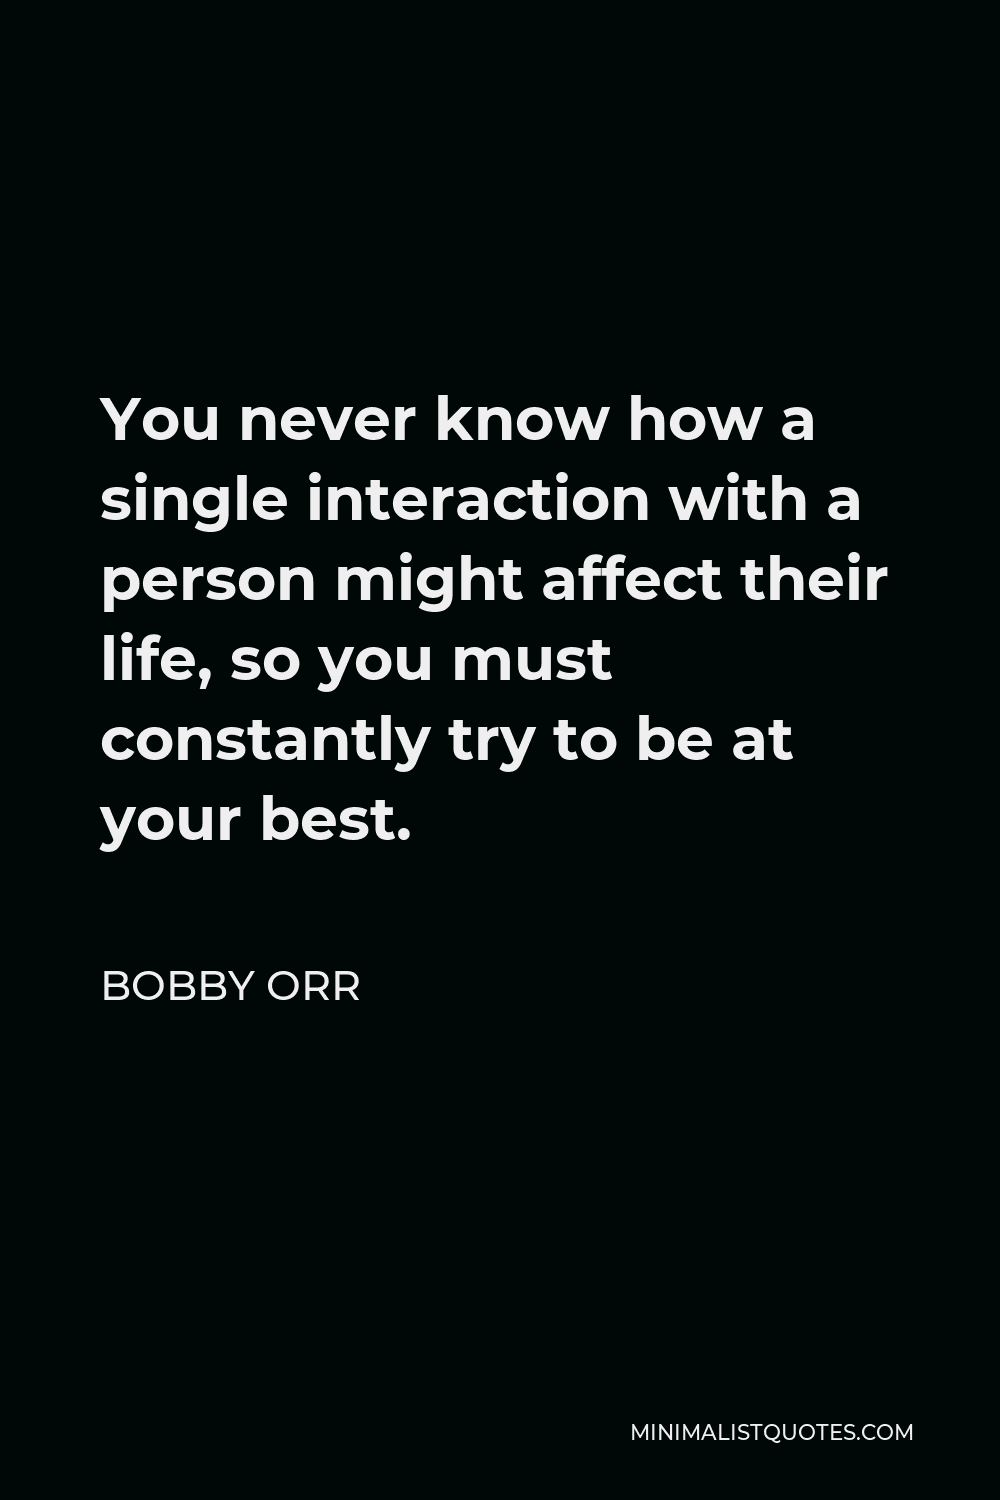 Bobby Orr Quote - You never know how a single interaction with a person might affect their life, so you must constantly try to be at your best.